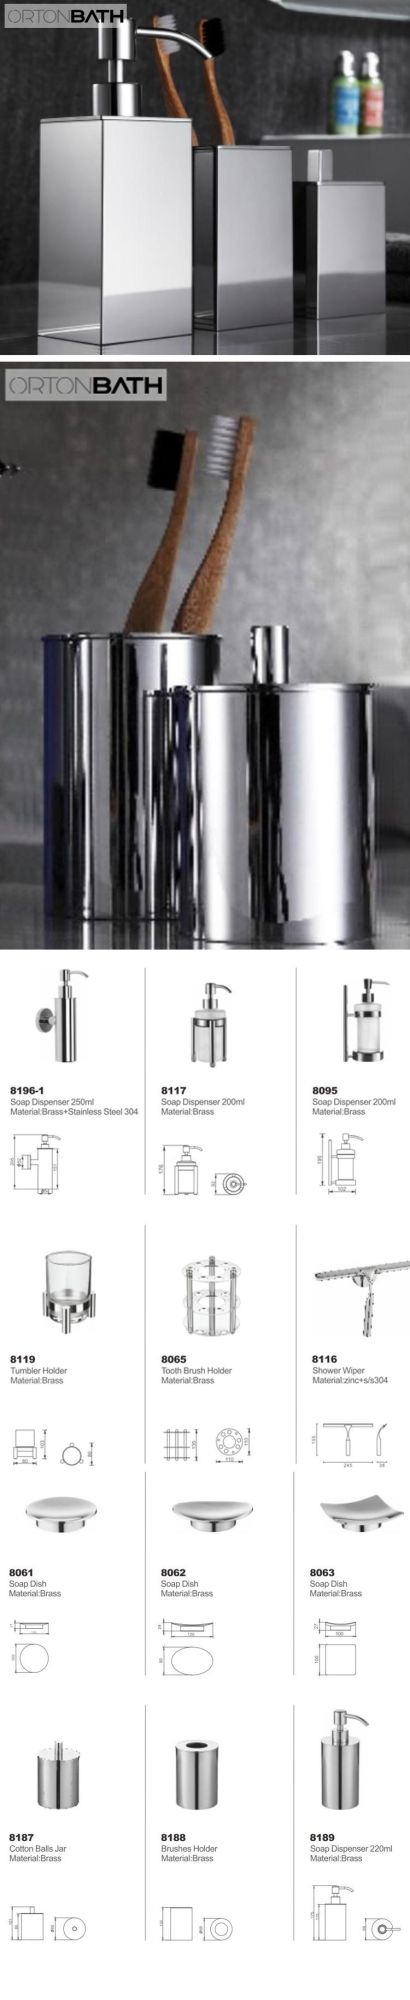 Brass Stainless Steel Commercial Luxurious Soap Dispenser Bathroom Accessories Set for Hotel Public Restroom